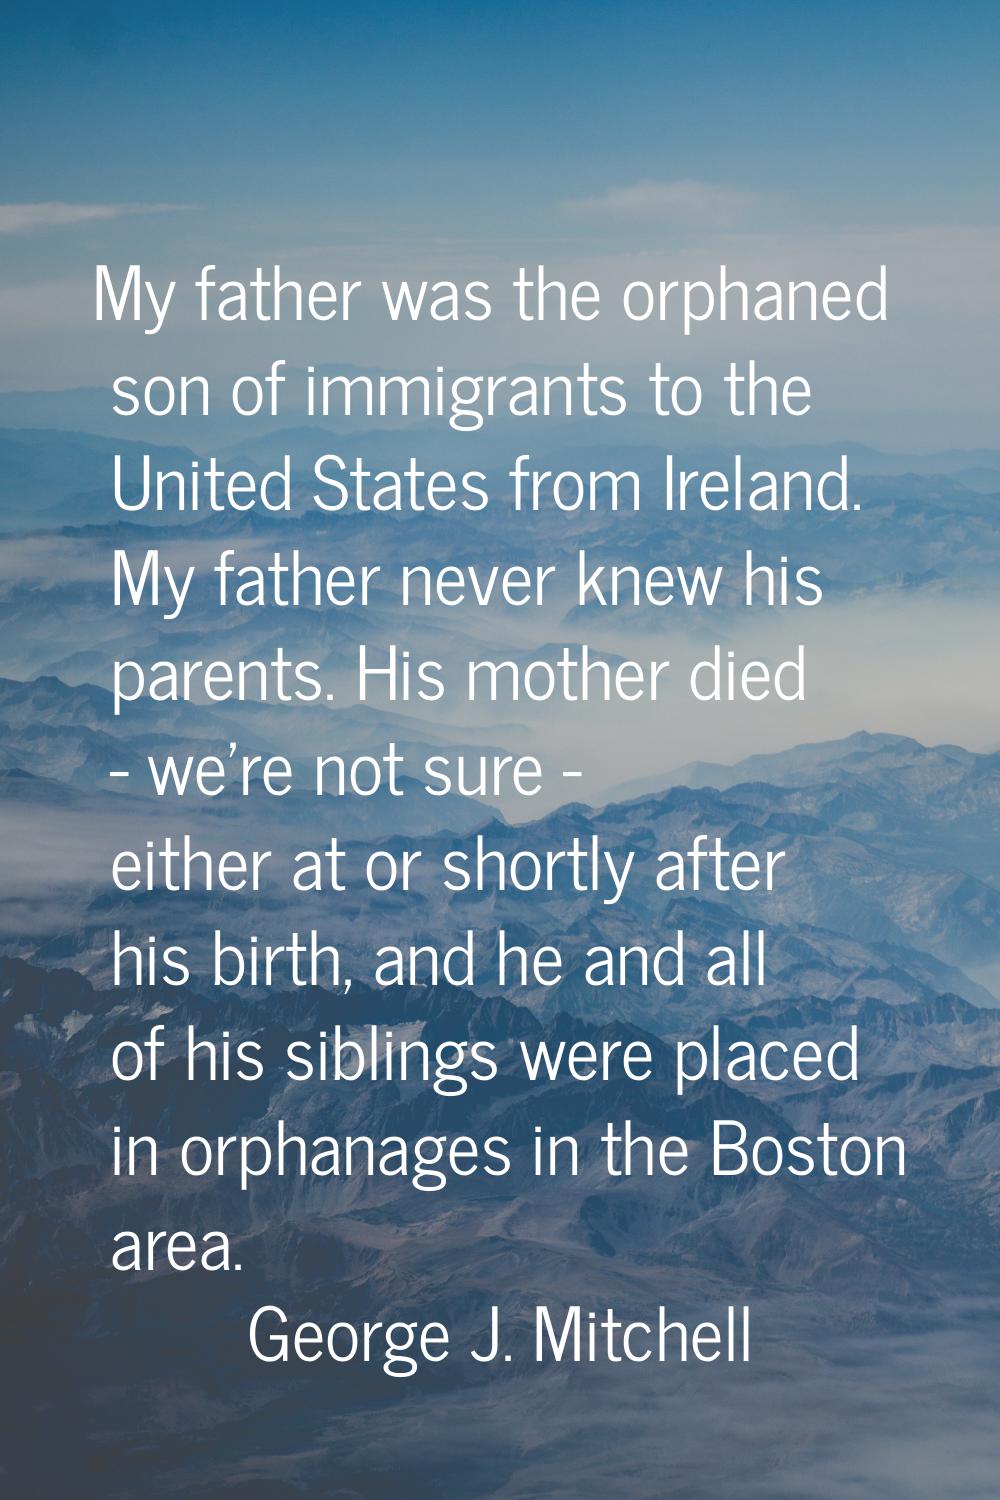 My father was the orphaned son of immigrants to the United States from Ireland. My father never kne